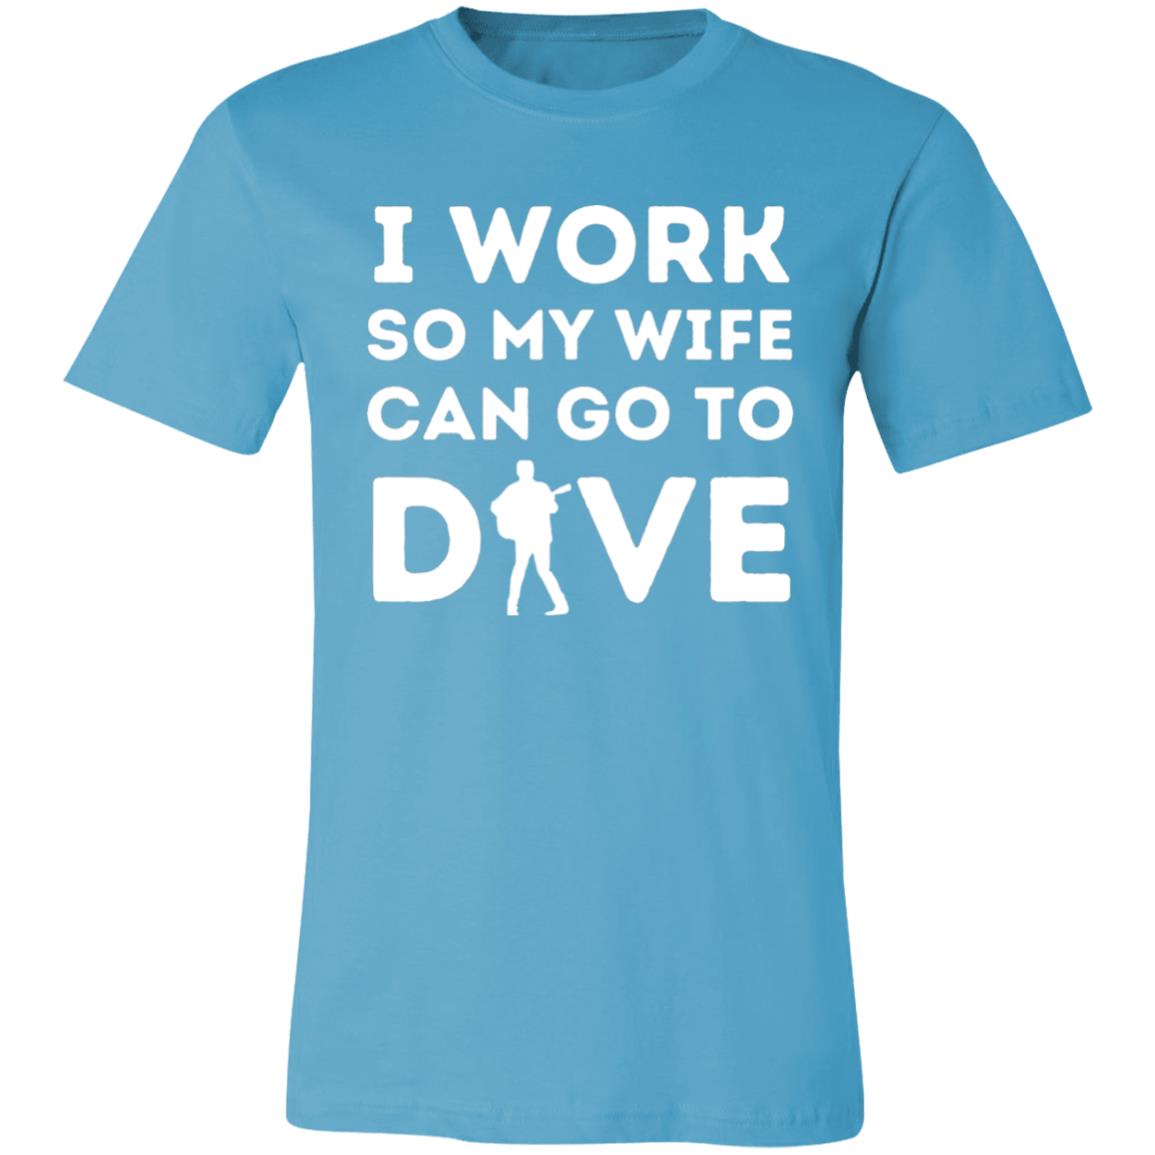 I Work So My Wife Can Go To Dave T-Shirt | Funny DMB Tour Merch